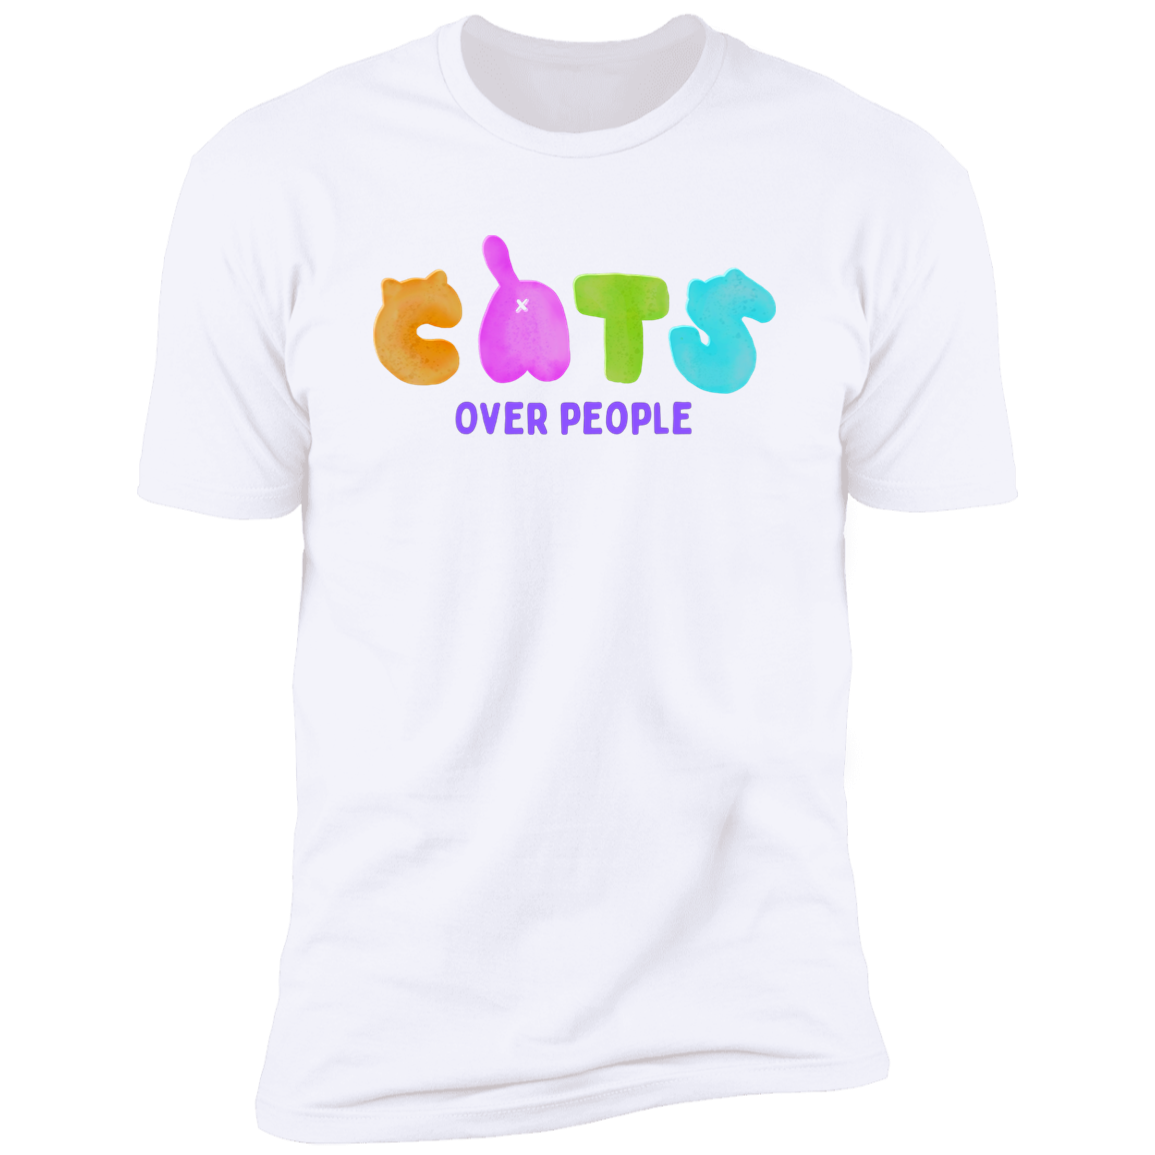 Cats Over People T-shirt, Cat Shirt for humans, in white